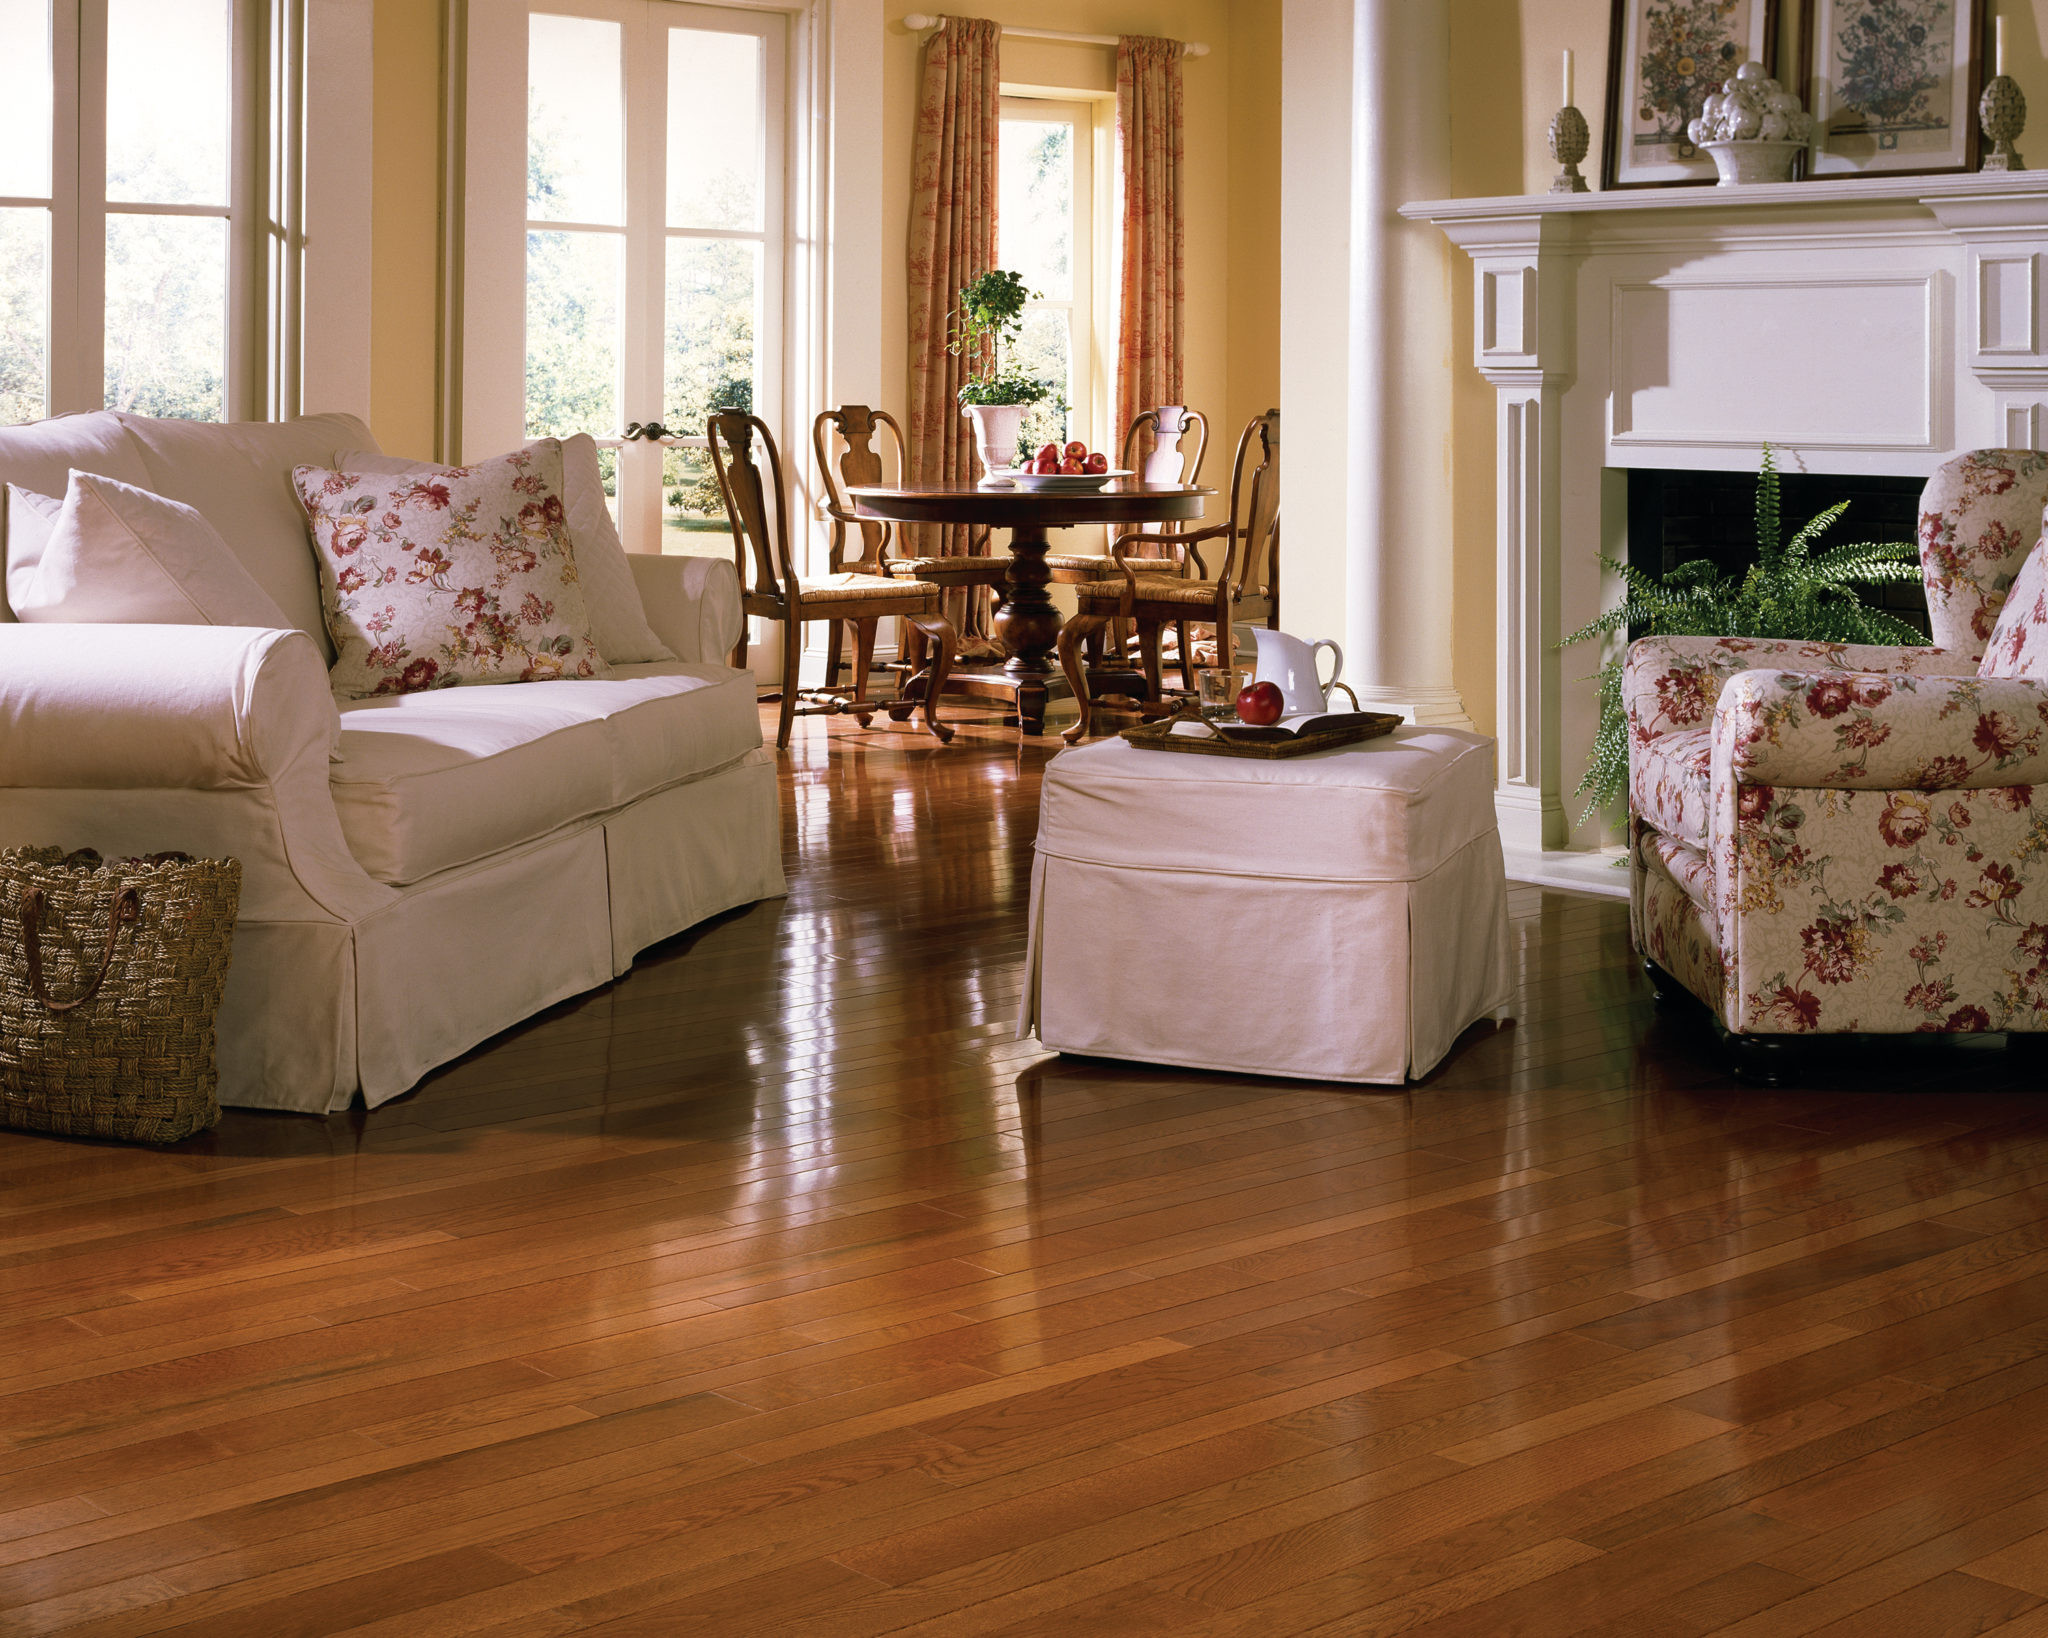 14 Unique Hardwood Flooring Fairfield Nj 2024 free download hardwood flooring fairfield nj of hardwood flooring refinishing installation powell flooring inc intended for contact us request a quote